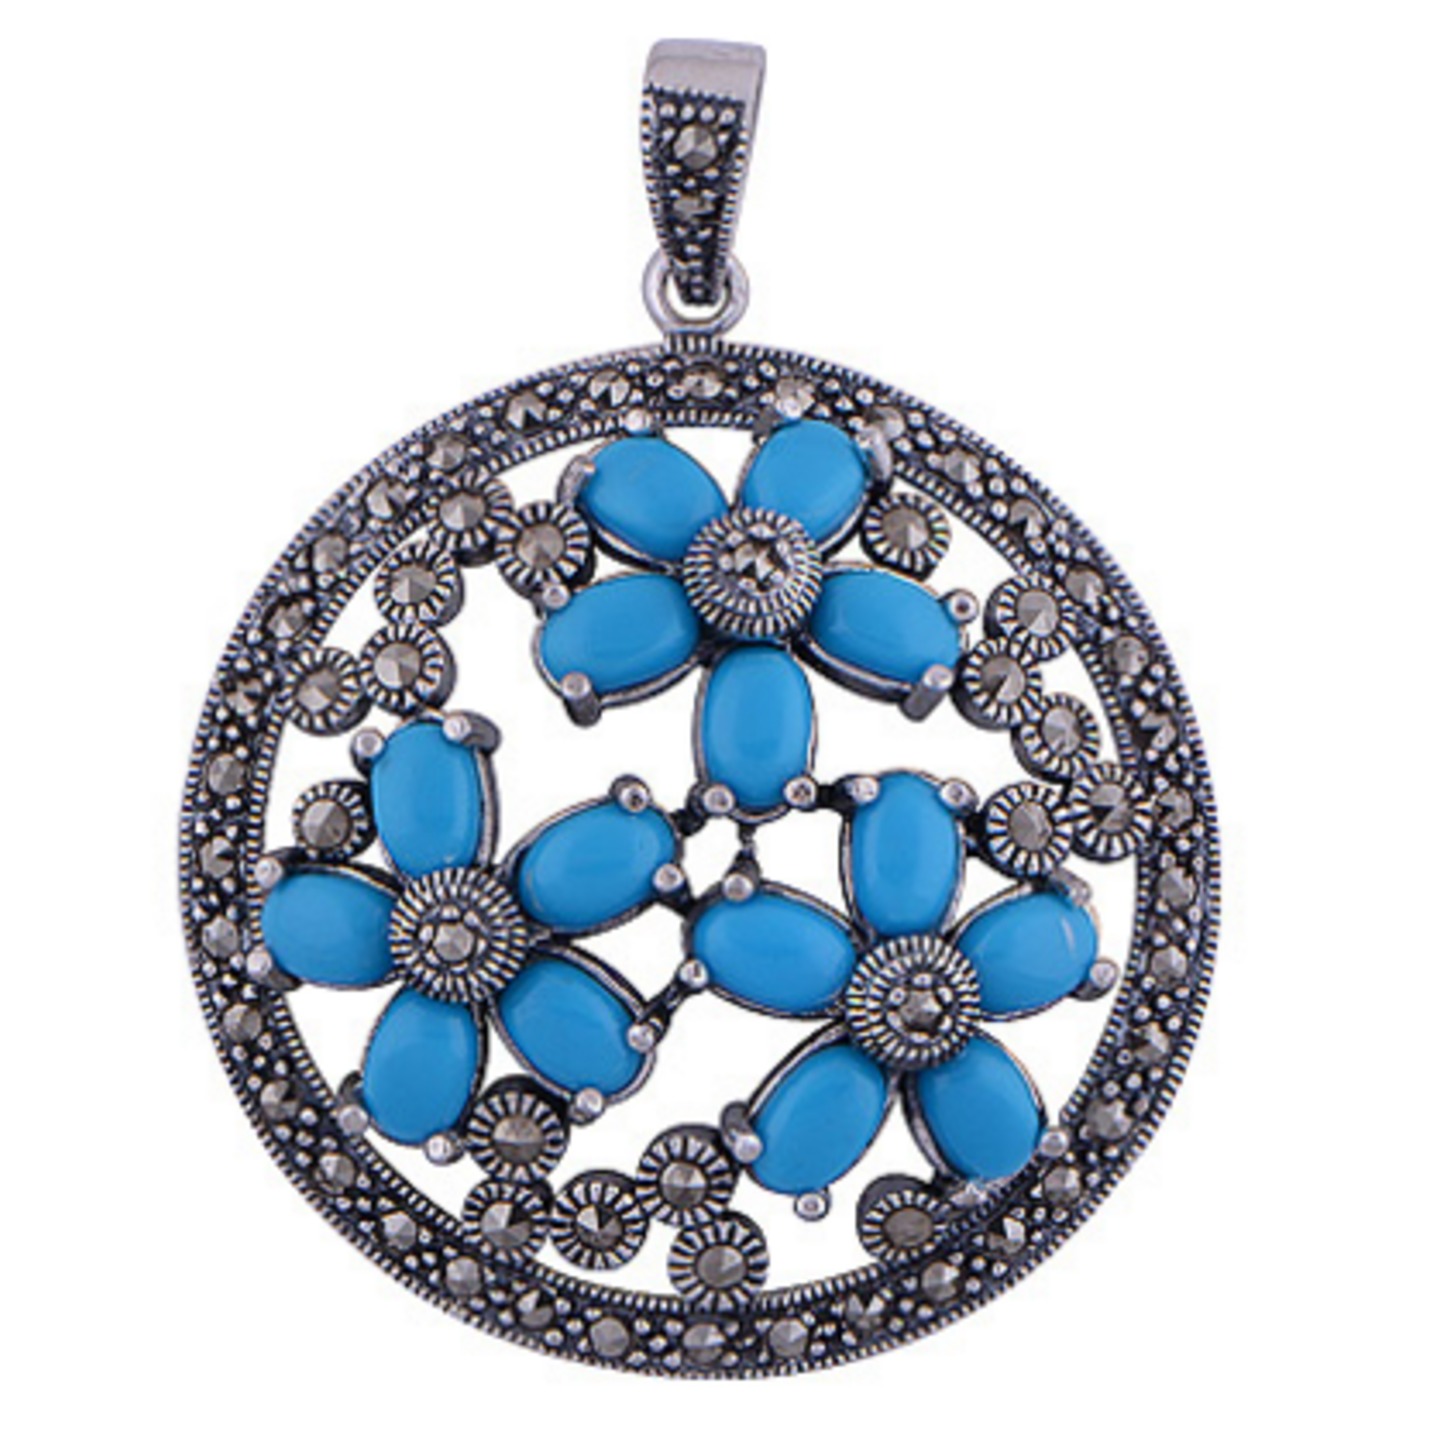 The Turquoise Flower Silver Pendant